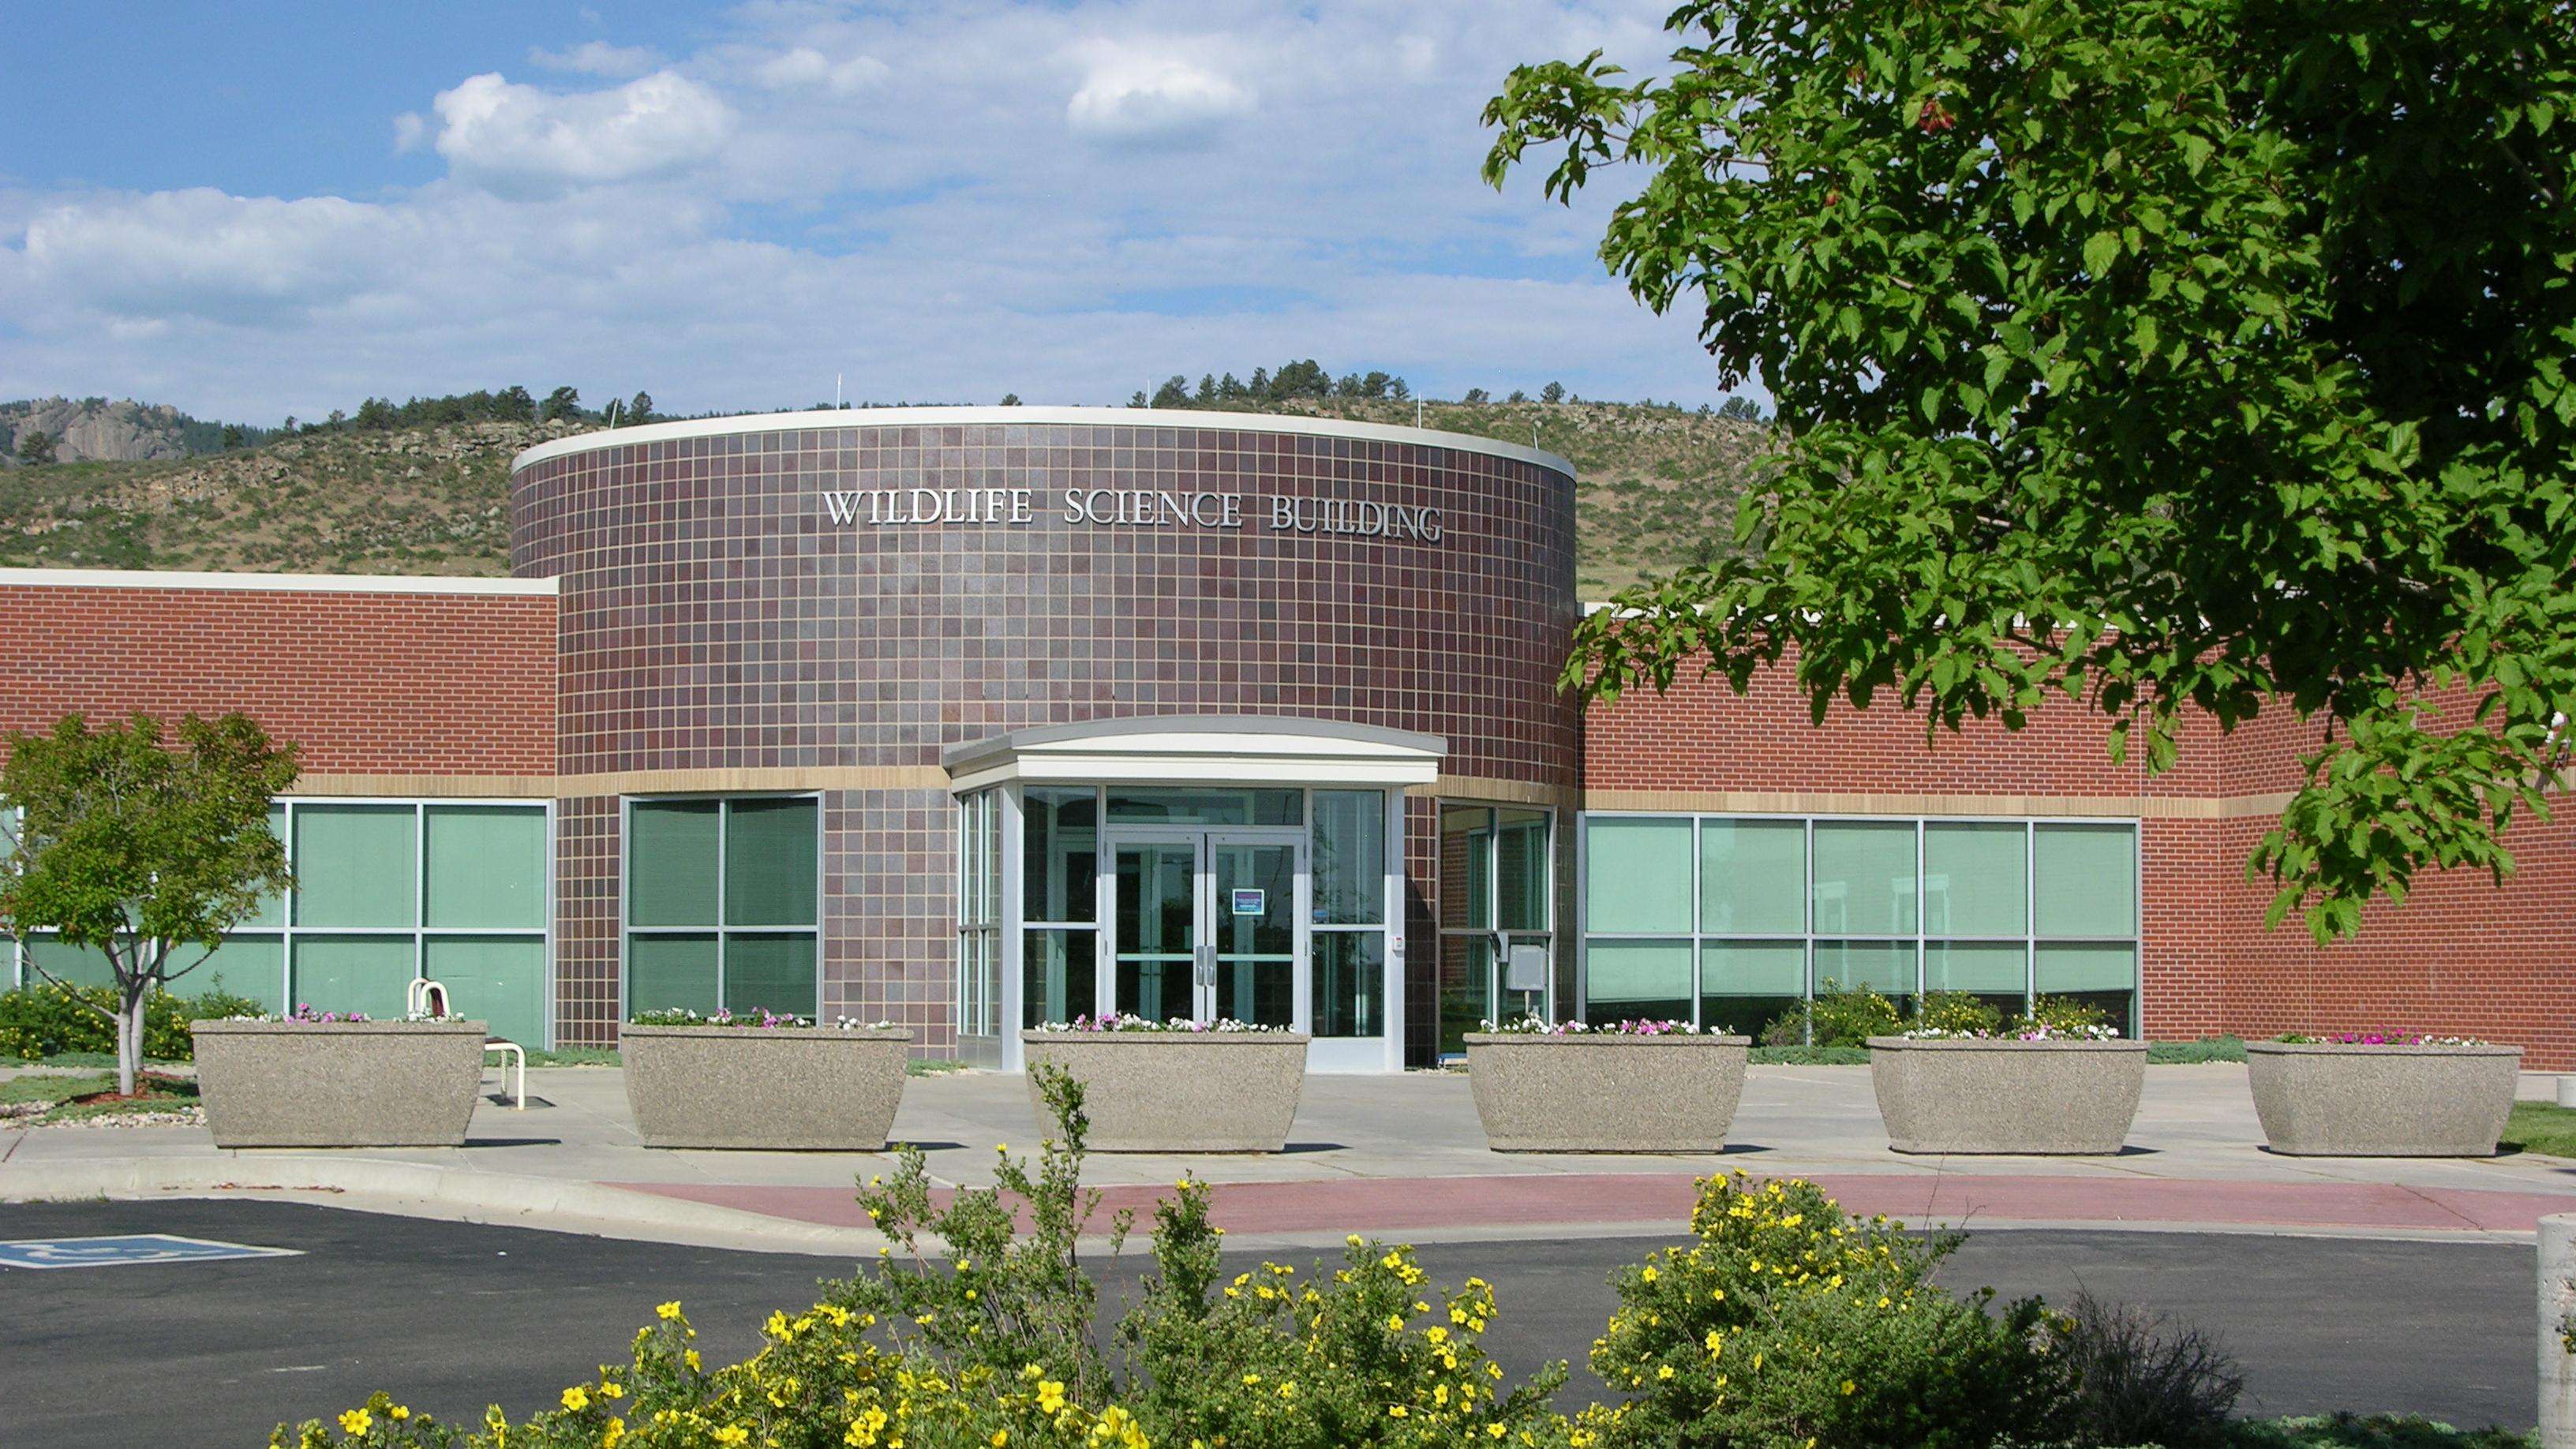 image showing the National Wildlife Research Center's Wildlife Science Building, view of front entrance on a sunny day